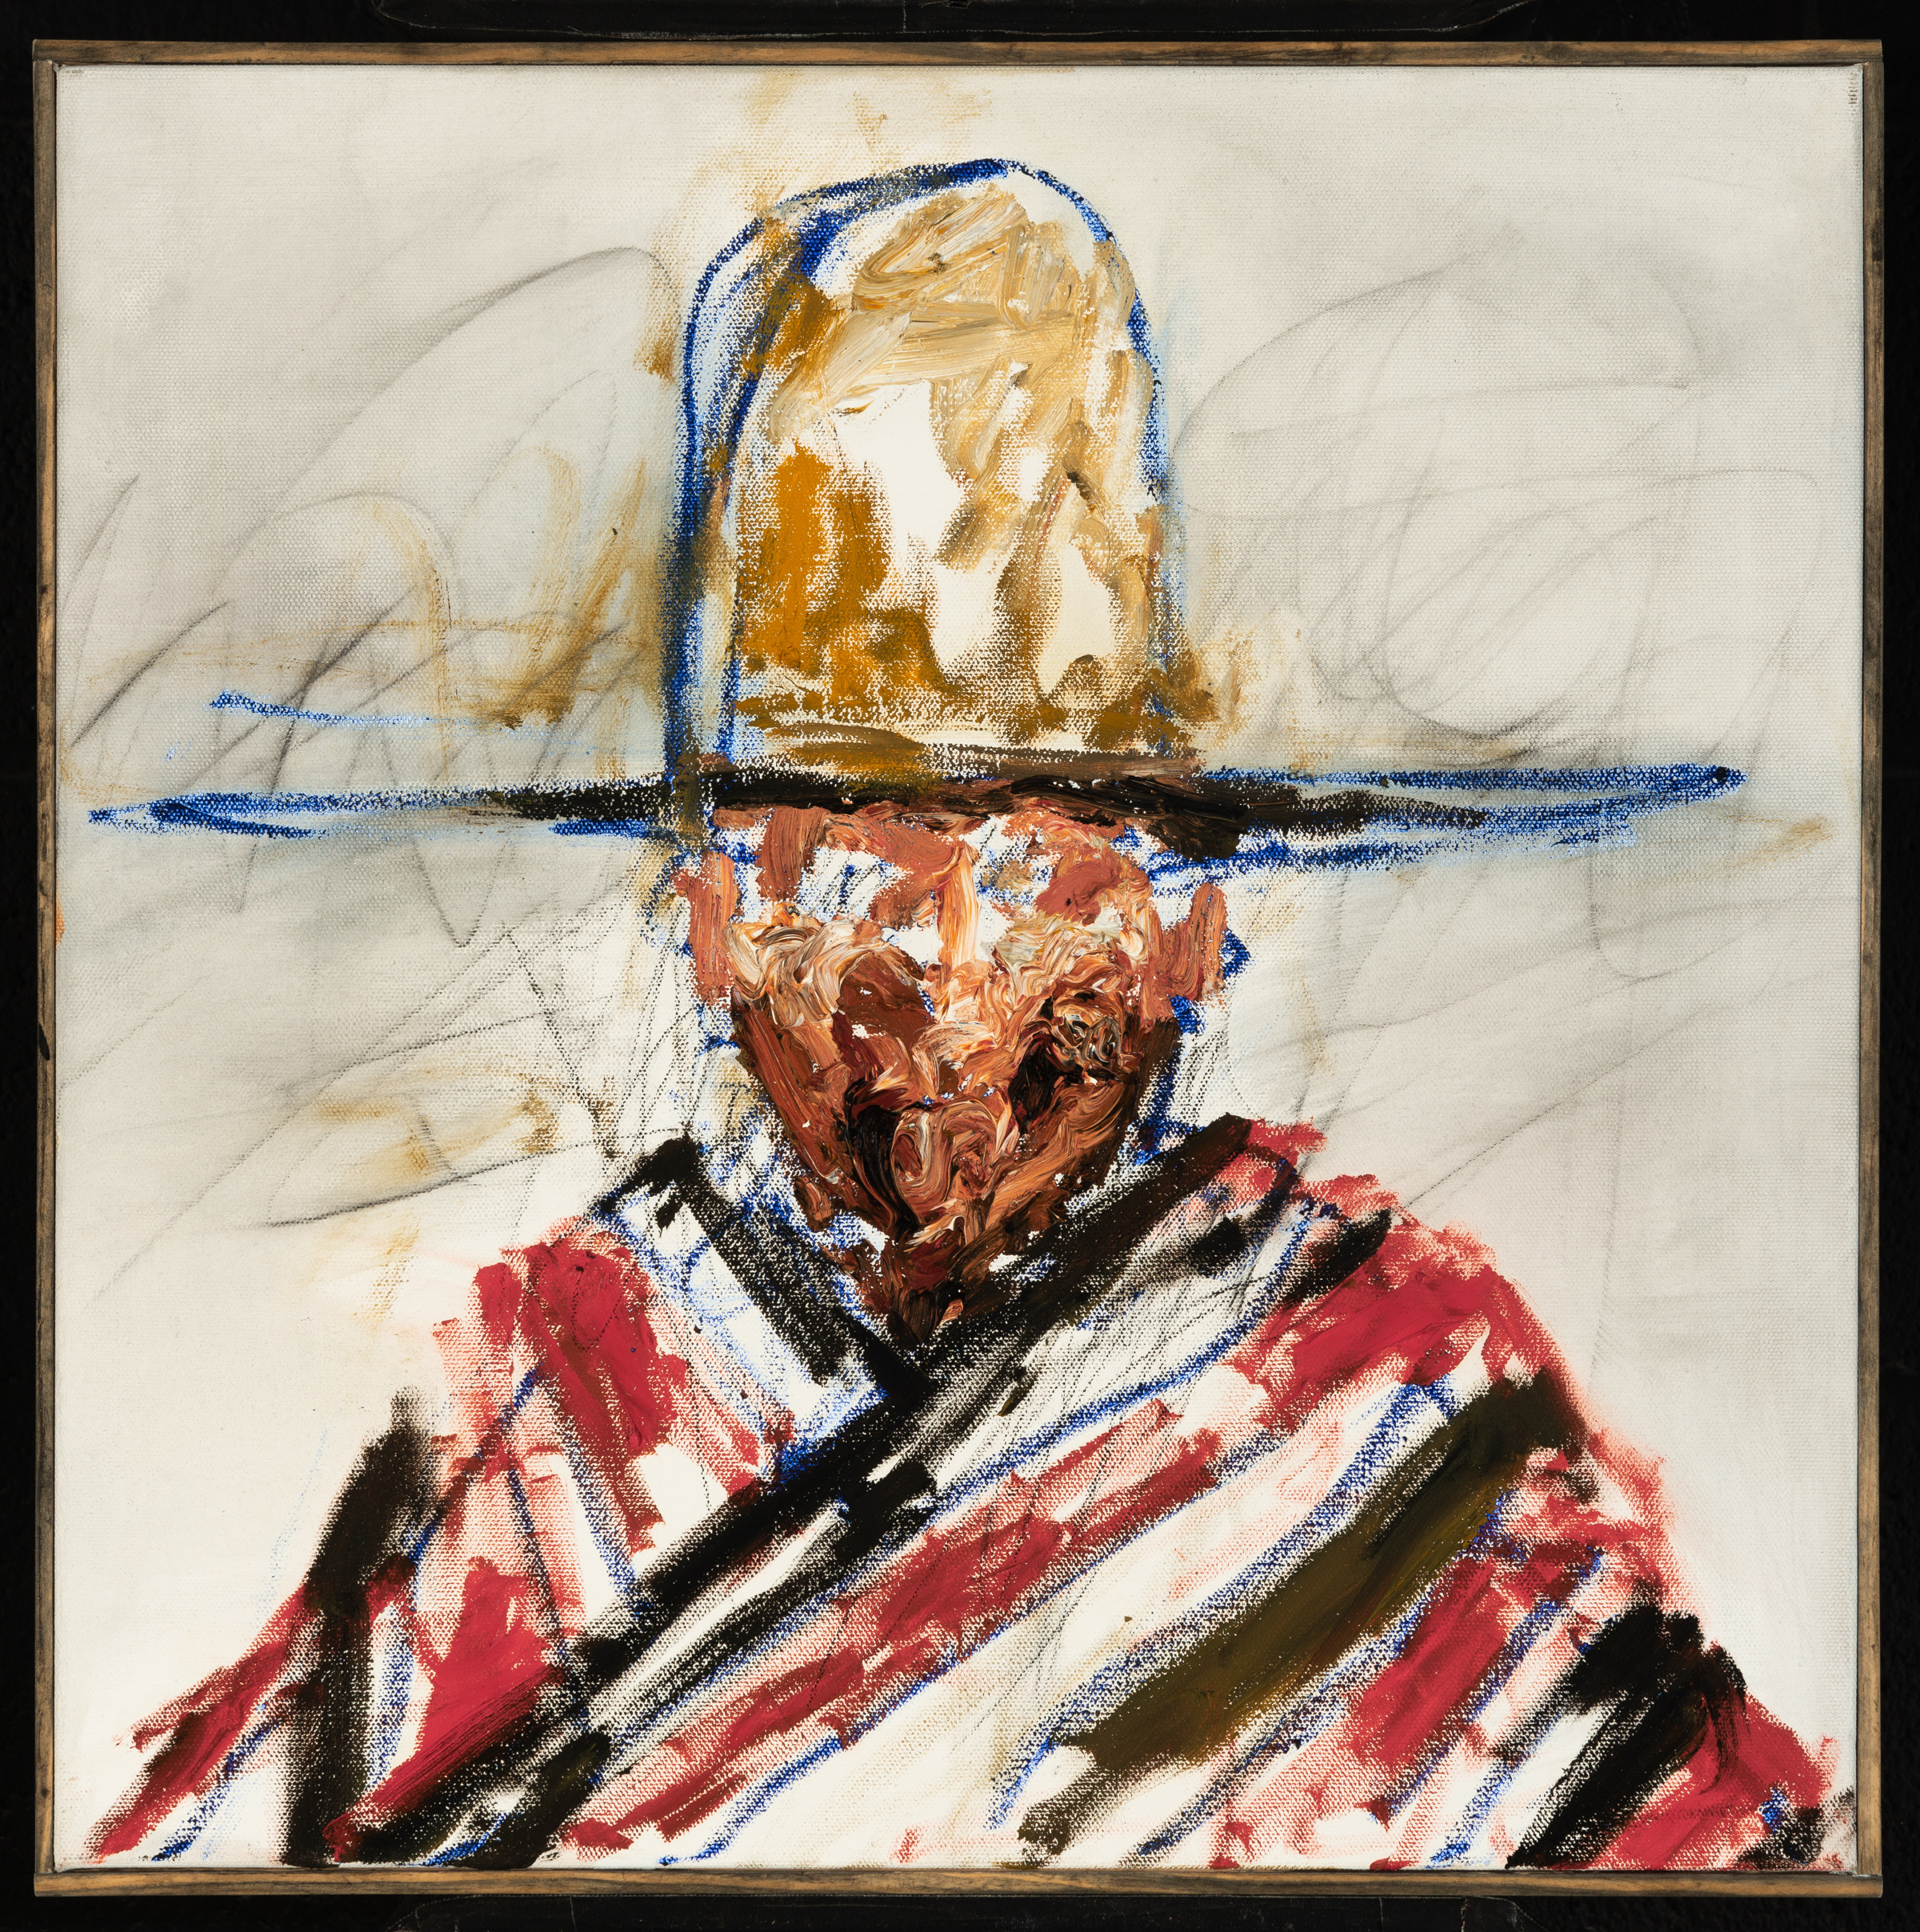 

											Patrick Dean Hubbell</b>

											<em>
												Tack Room</em> 

											<h4>
												Santa Fe: August 12 – October 22, 2022											</h4>

		                																																<i>They May Run out of Natives to Sit for These Portraits,</i>  
																																								2022, 
																																								Oil, oil pastel, charcoal on canvas, wood lattice strip frame, 
																																								20 1/2 x 20 1/2 x 1 3/4 inches 
																								
		                				